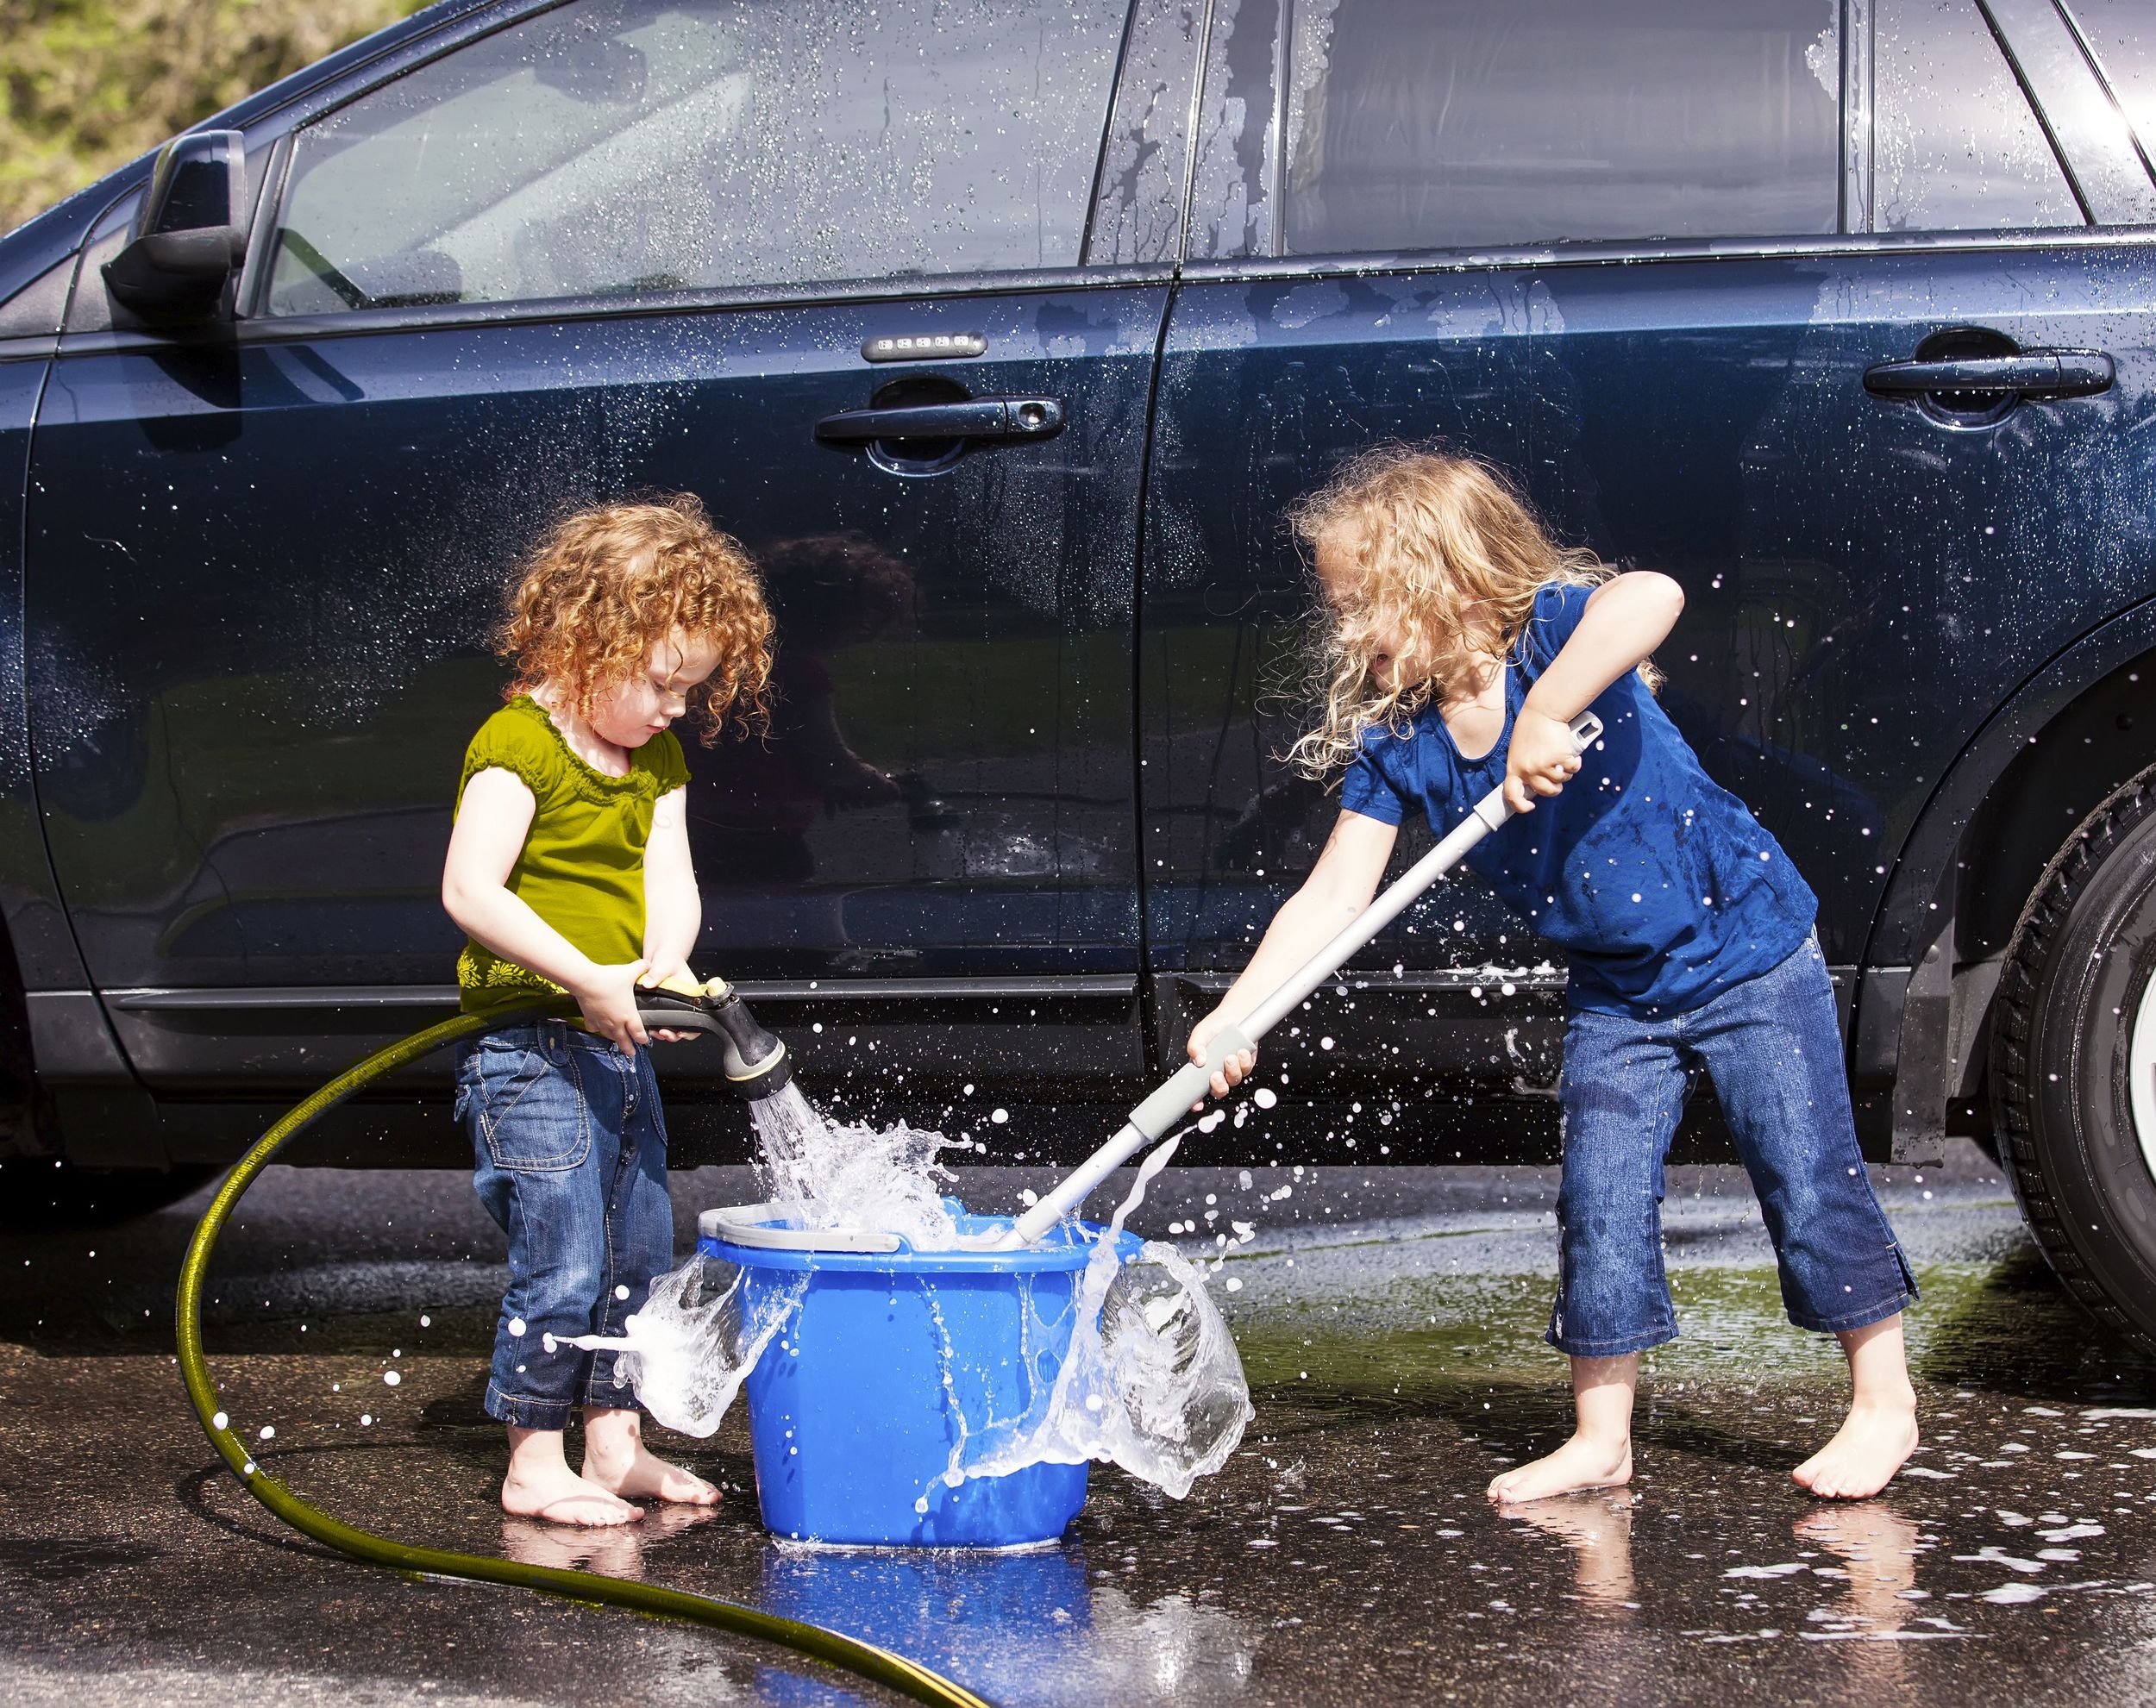   PAVED DRIVEWAYS MEAN CLEANER CARS   SCRUB A DUB DUB,&nbsp;ONE HALIFAX DRIVEWAY AT A TIME   GET A QUOTE  